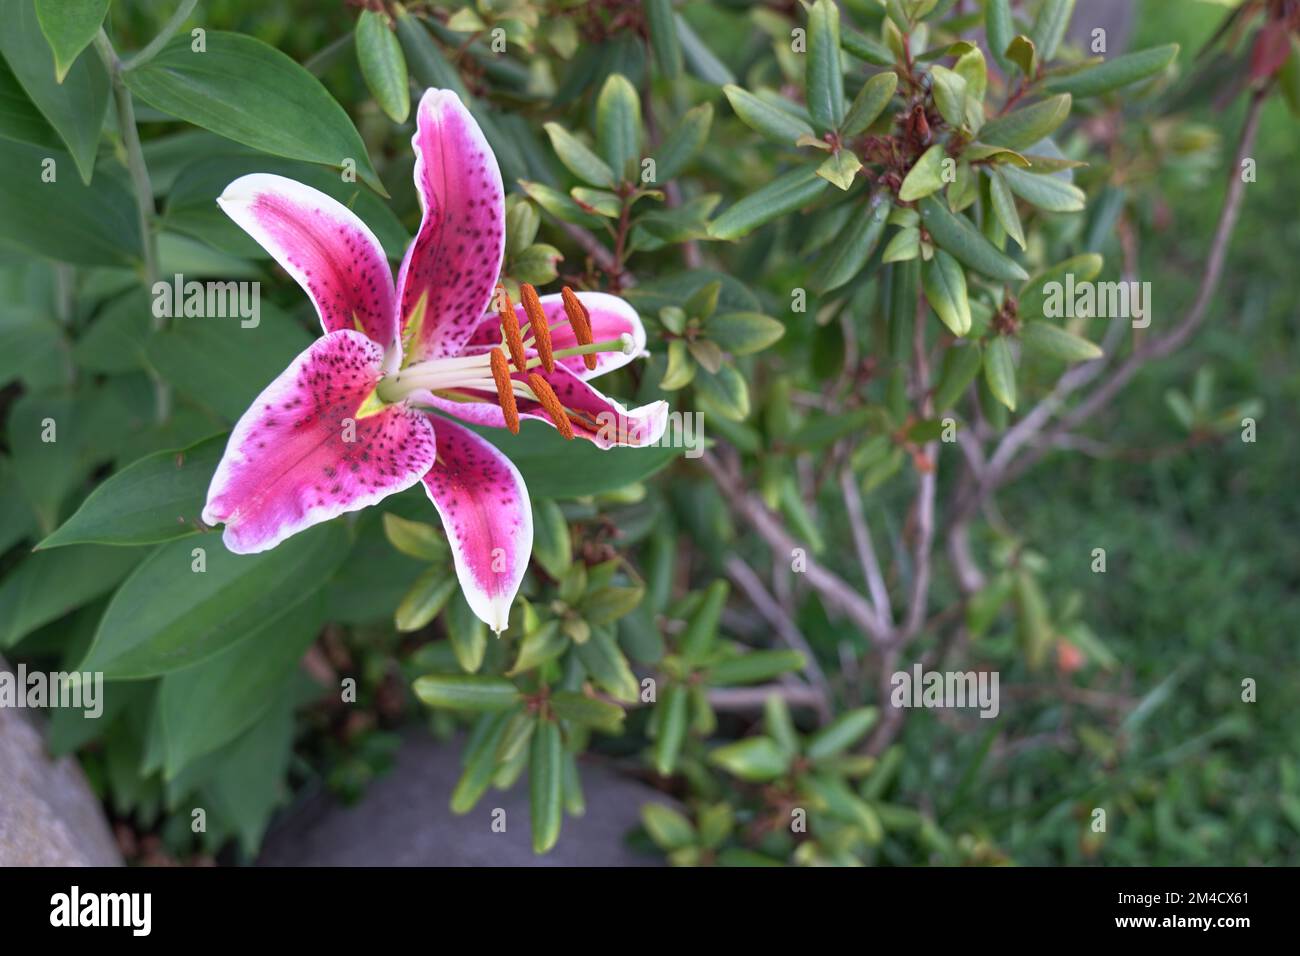 The macro shot of a Lilium speciosum flower blooming in the greenery Stock Photo